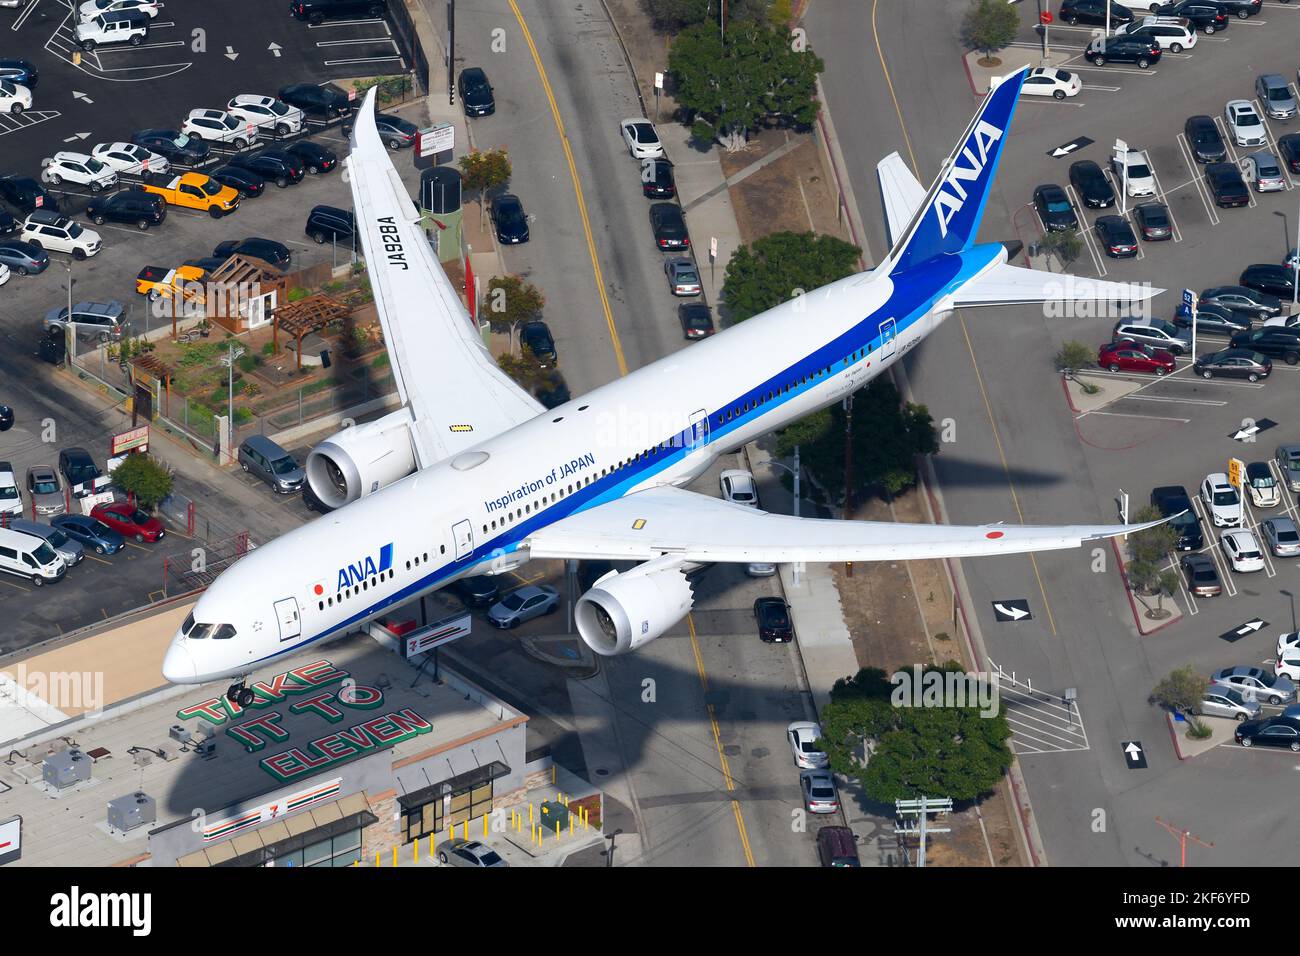 All Nippon Airways Boeing 787 Dreamliner aircraft about to land. Airplane 787-9 of All Nippon, ANA registered as JA928A. Stock Photo